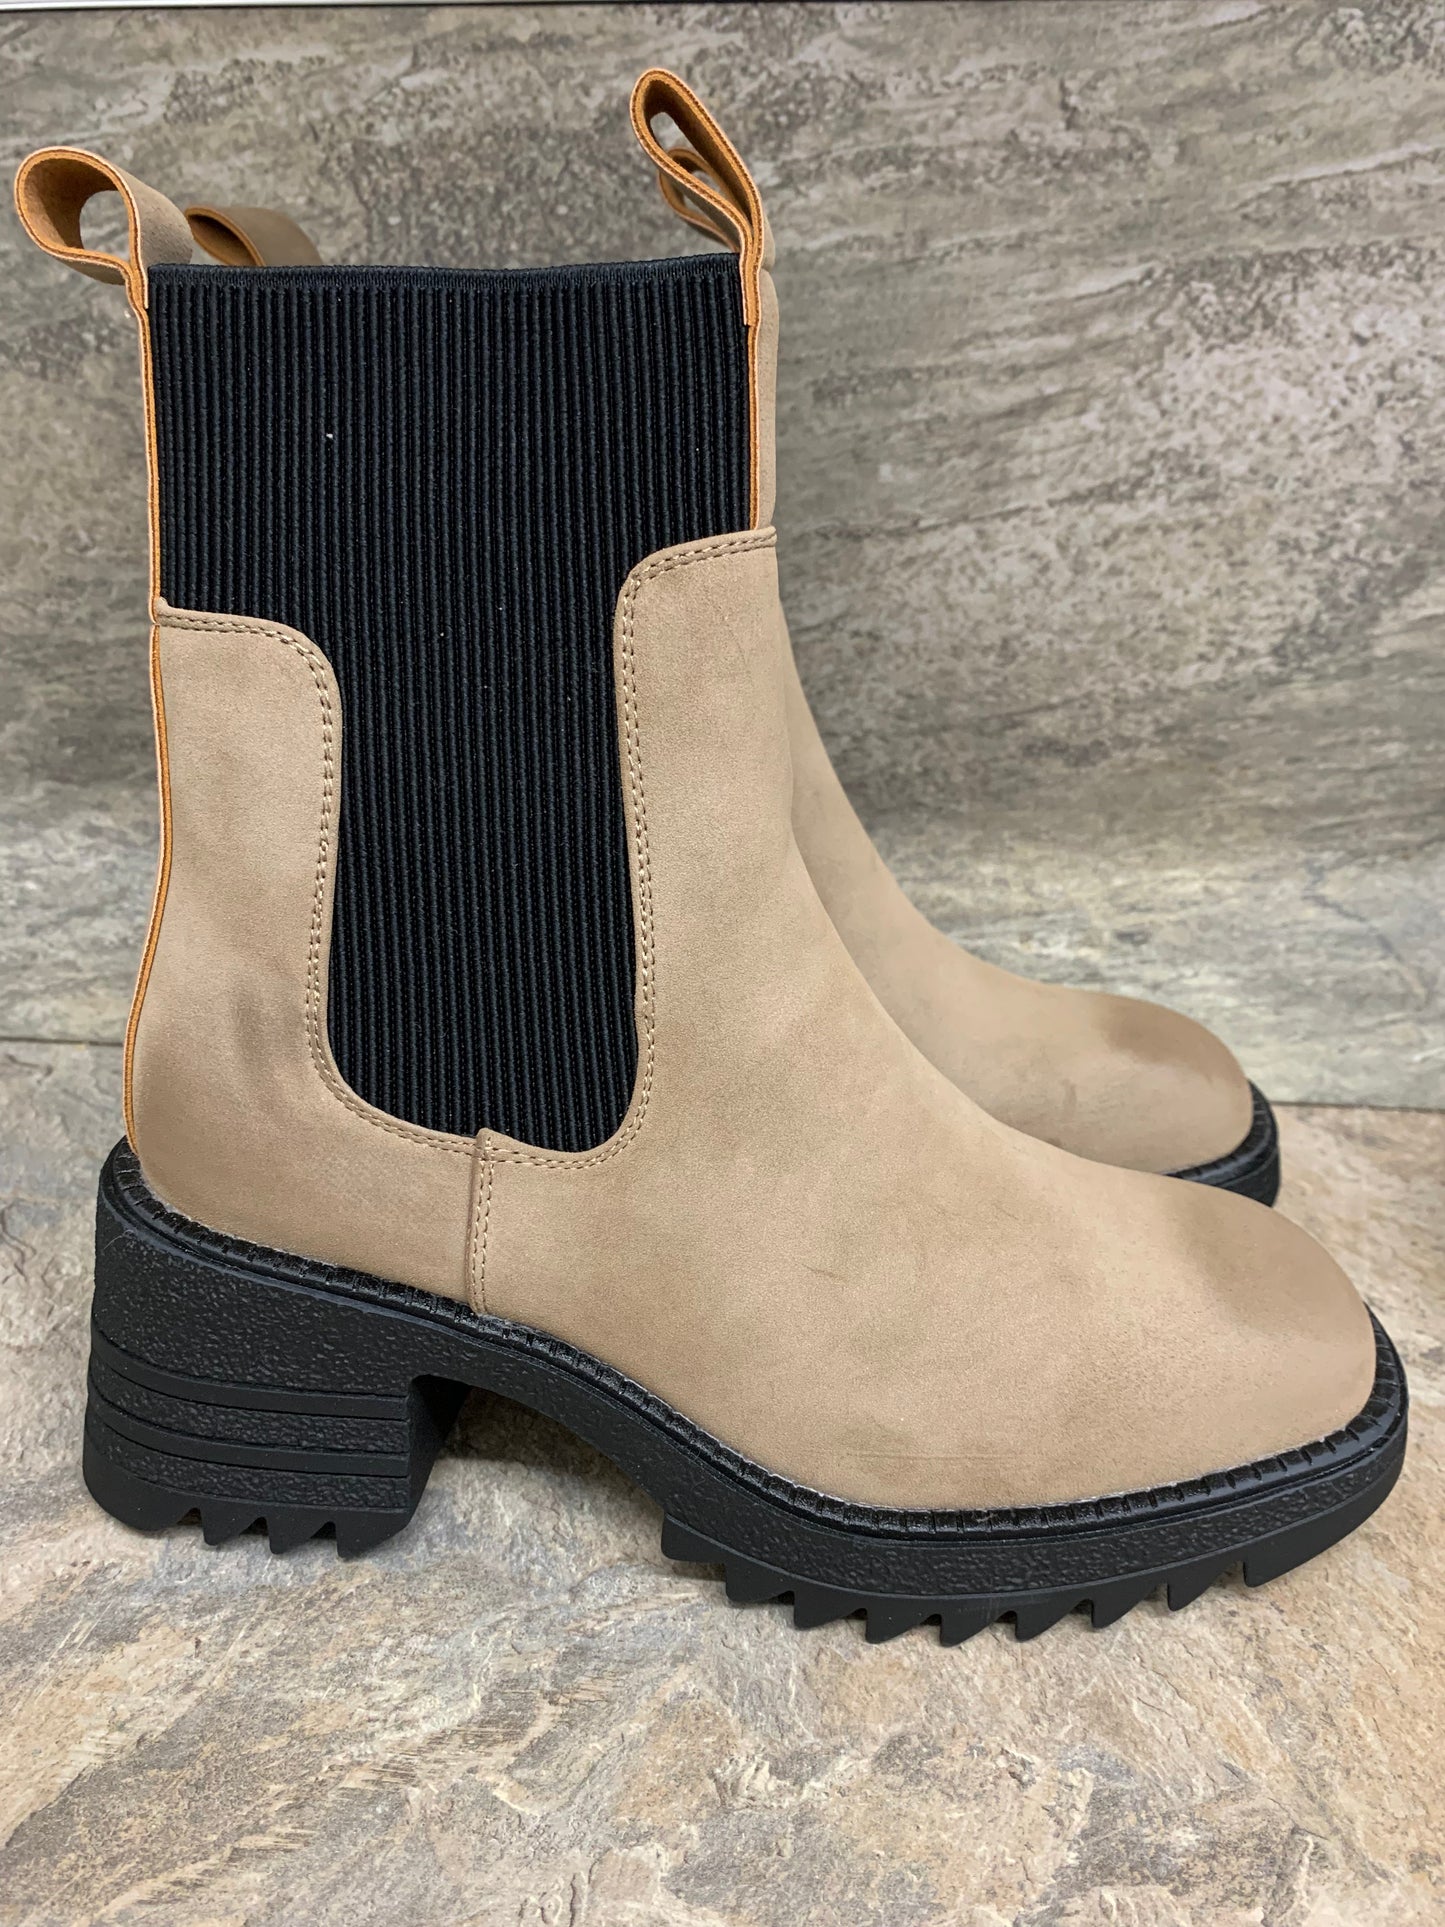 Camel chunky Chelsea boot with zip sizes 3-8